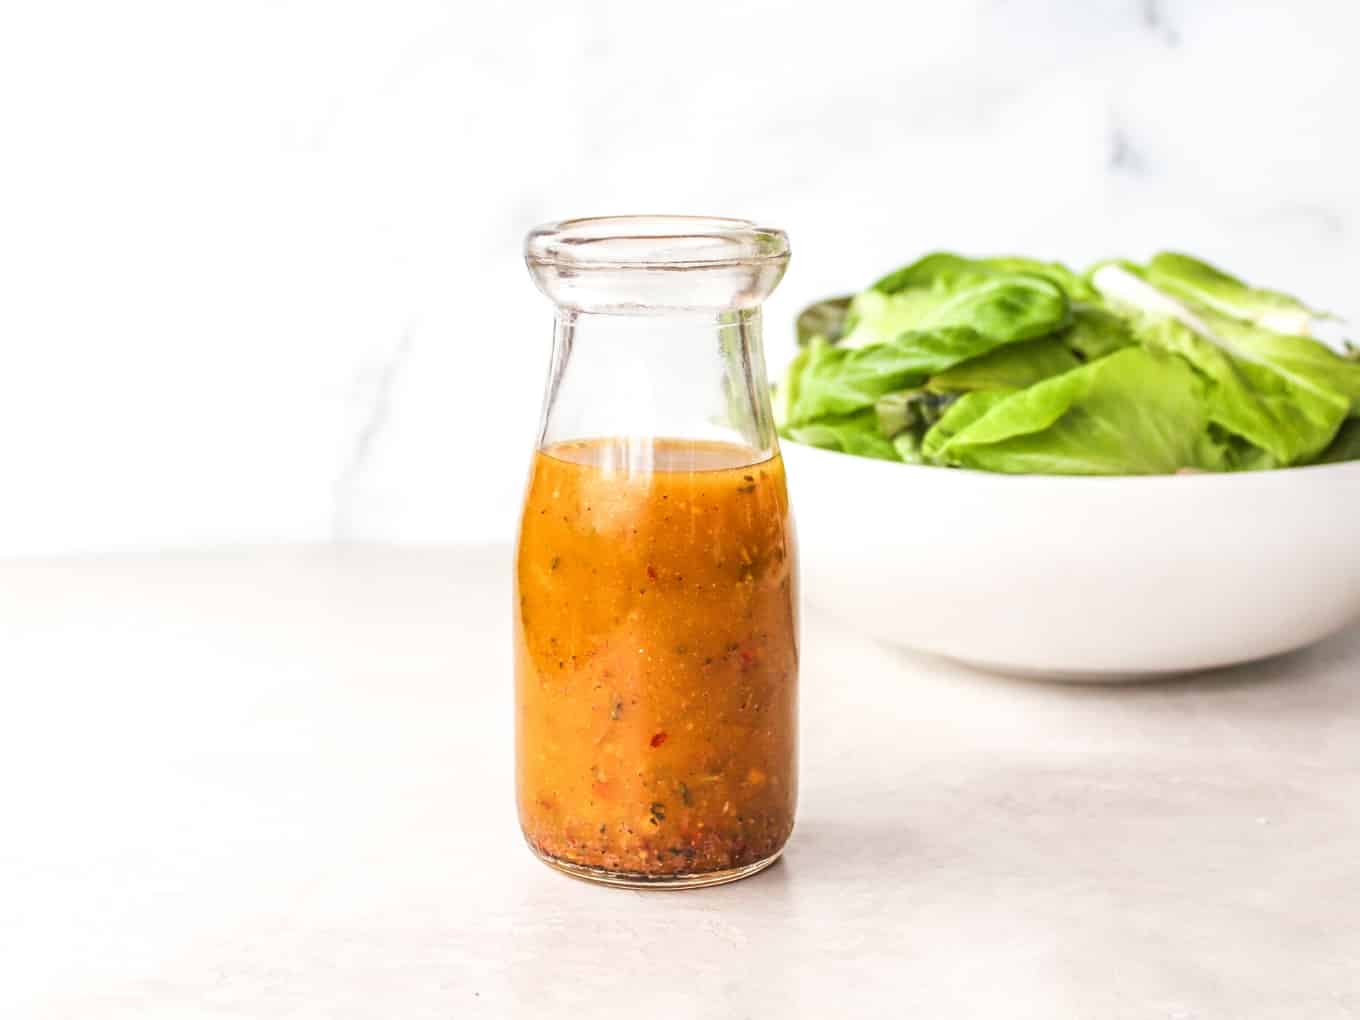 https://thewholecook.com/wp-content/uploads/2017/12/Easy-Homemade-Italian-Dressing-by-The-Whole-Cook-new-horizontal.jpg